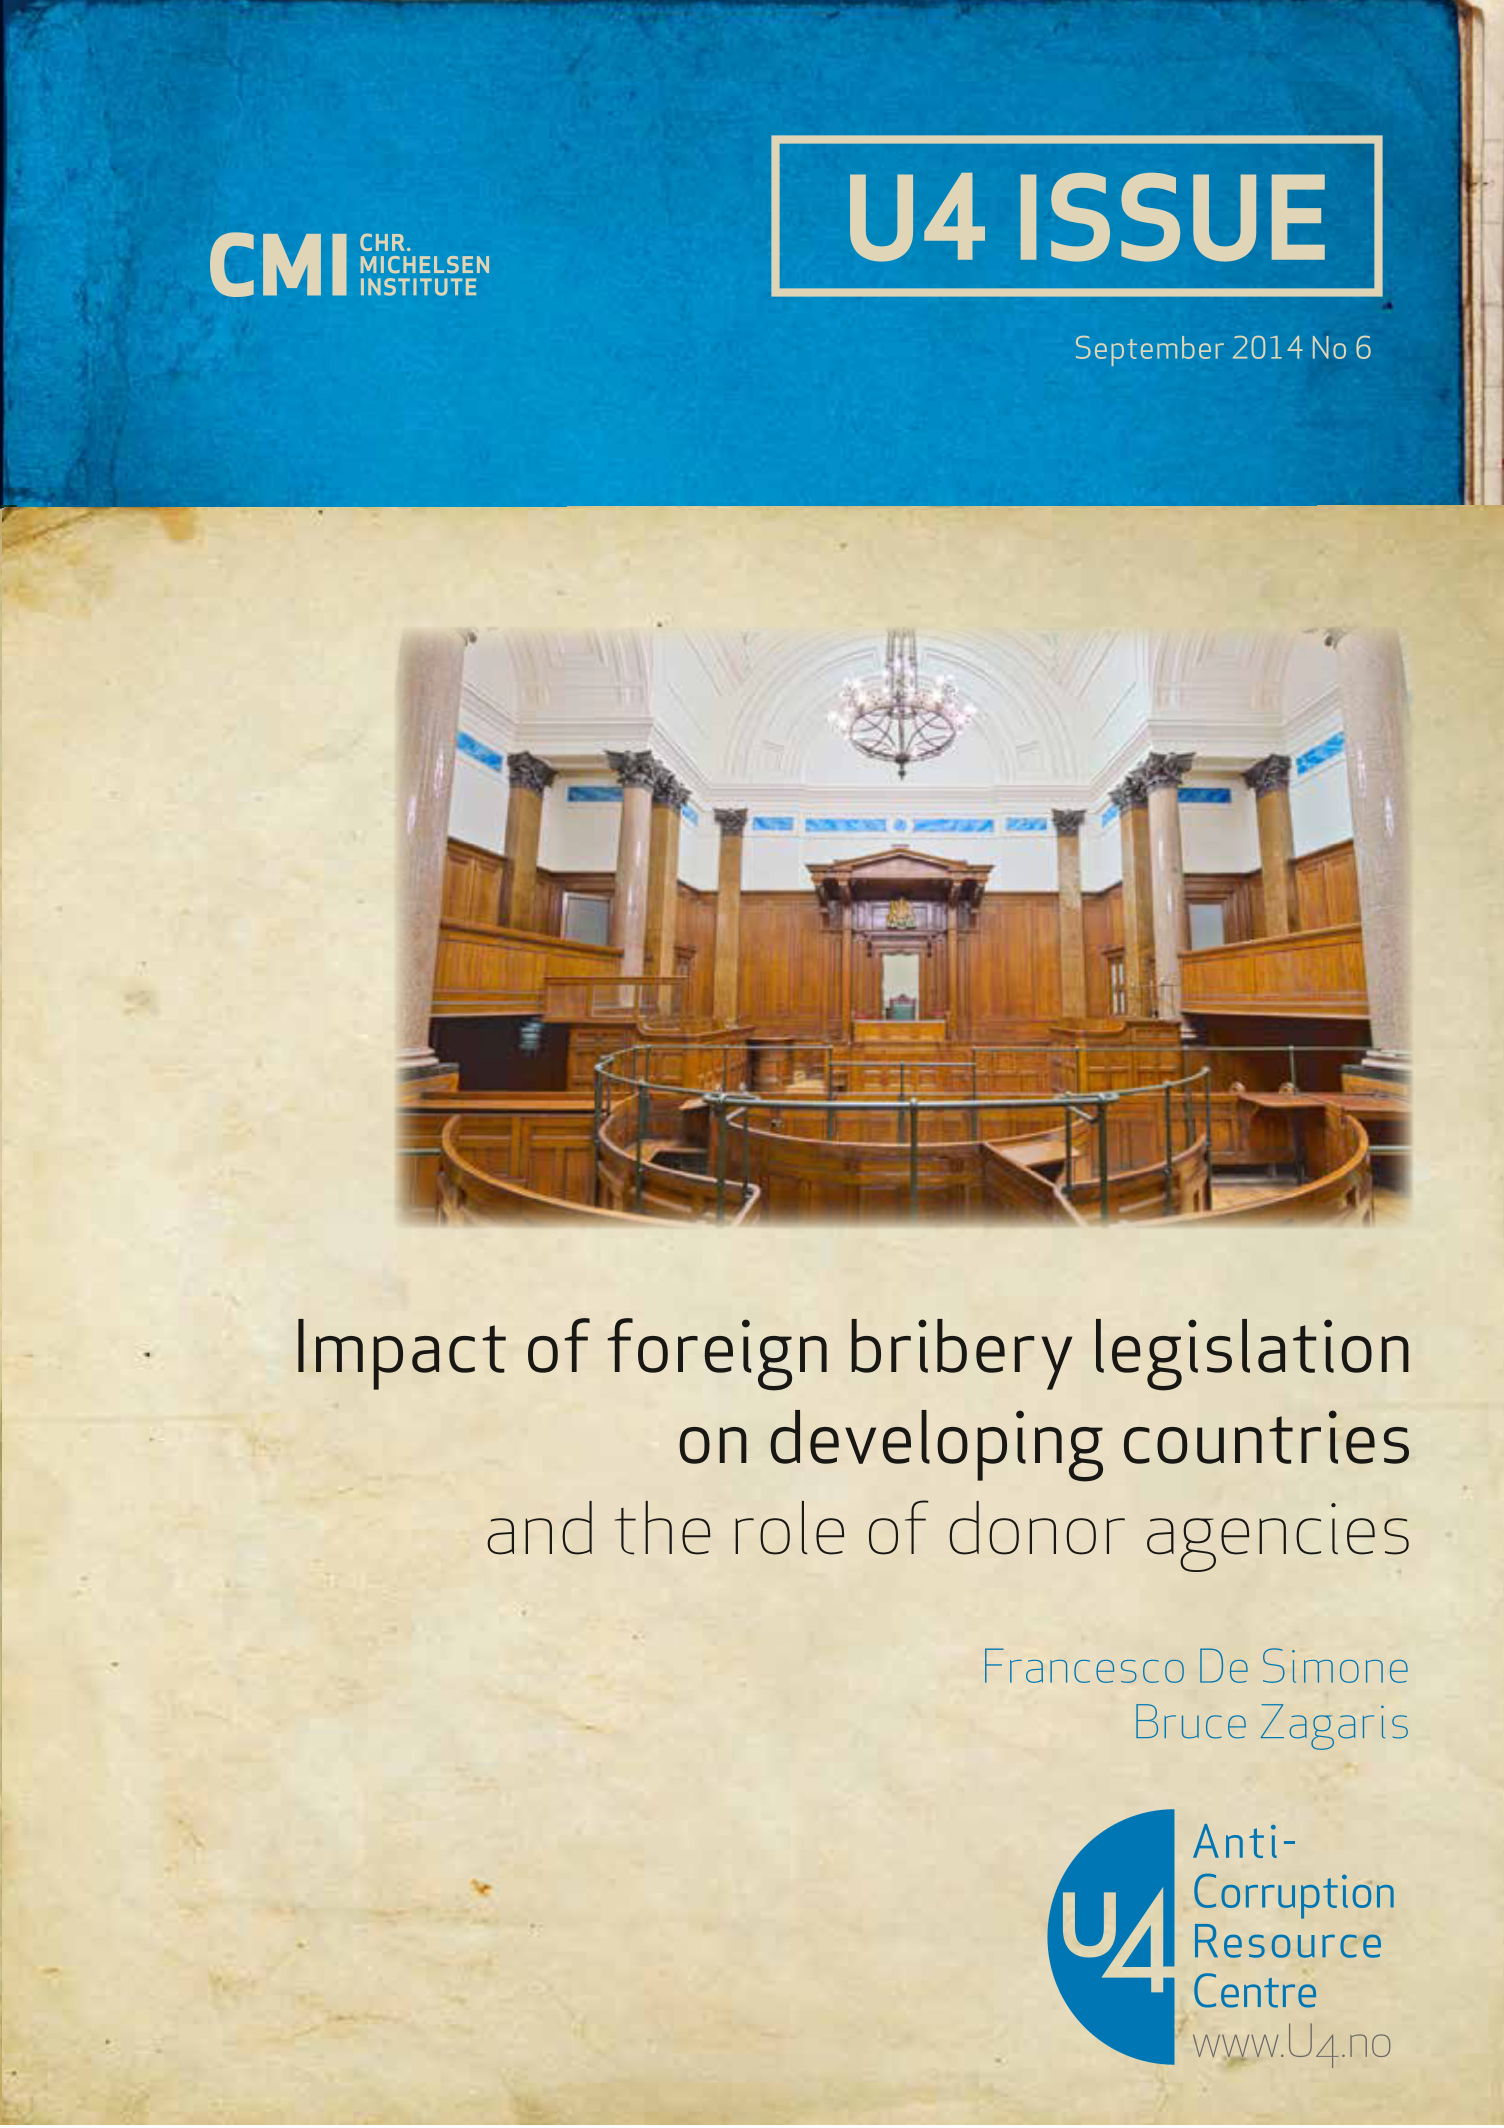 Impact of foreign bribery legislation on developing countries and the role of donor agencies